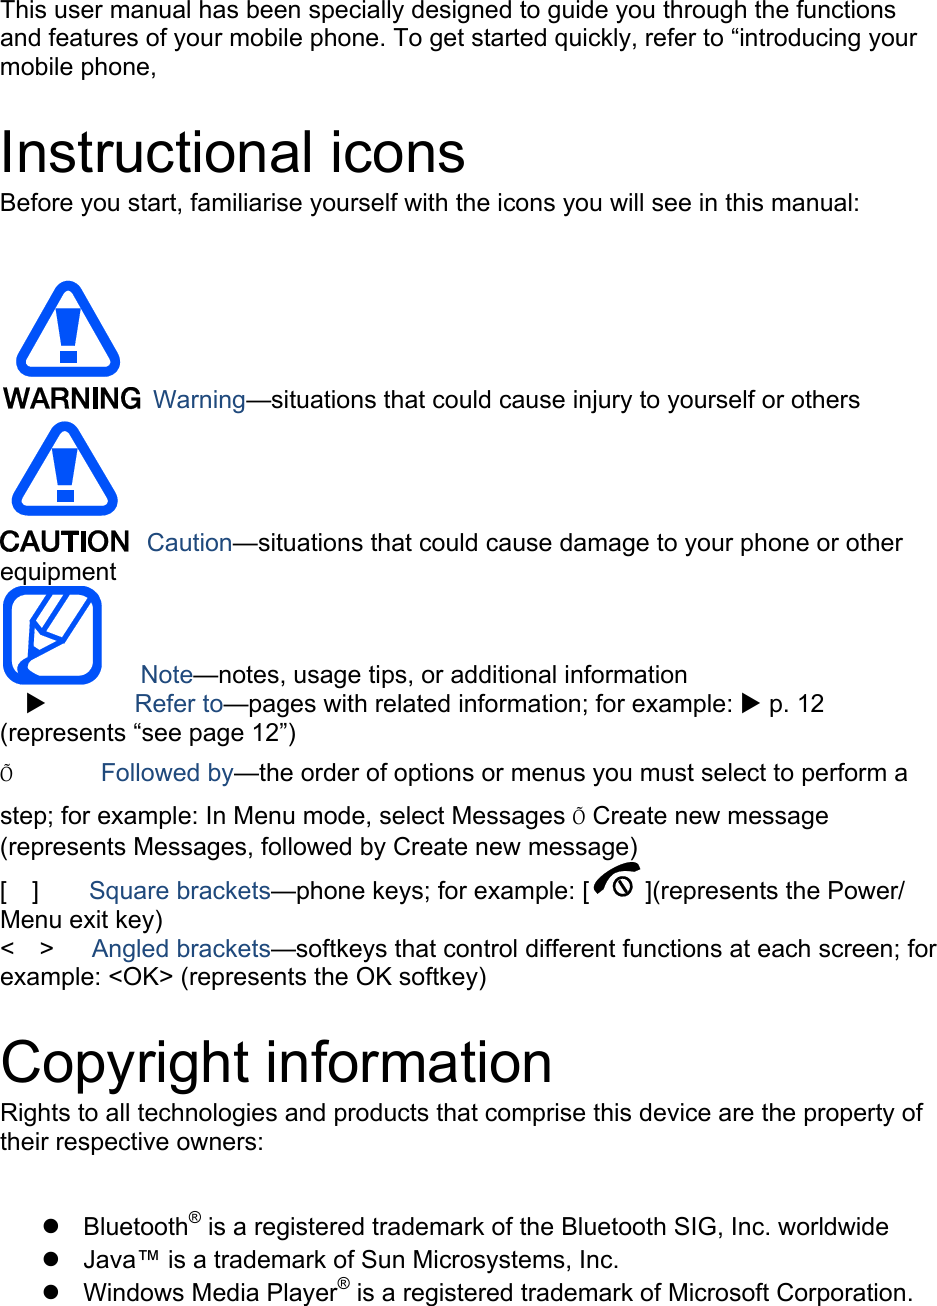 This user manual has been specially designed to guide you through the functions and features of your mobile phone. To get started quickly, refer to “introducing your mobile phone,  Instructional icons Before you start, familiarise yourself with the icons you will see in this manual:     Warning—situations that could cause injury to yourself or others  Caution—situations that could cause damage to your phone or other equipment    Note—notes, usage tips, or additional information          Refer to—pages with related information; for example:  p. 12 (represents “see page 12”) Õ       Followed by—the order of options or menus you must select to perform a step; for example: In Menu mode, select Messages Õ Create new message (represents Messages, followed by Create new message) [  ]    Square brackets—phone keys; for example: [ ](represents the Power/ Menu exit key) &lt;  &gt;   Angled brackets—softkeys that control different functions at each screen; for example: &lt;OK&gt; (represents the OK softkey)  Copyright information Rights to all technologies and products that comprise this device are the property of their respective owners:   Bluetooth® is a registered trademark of the Bluetooth SIG, Inc. worldwide   Java™ is a trademark of Sun Microsystems, Inc.  Windows Media Player® is a registered trademark of Microsoft Corporation.  